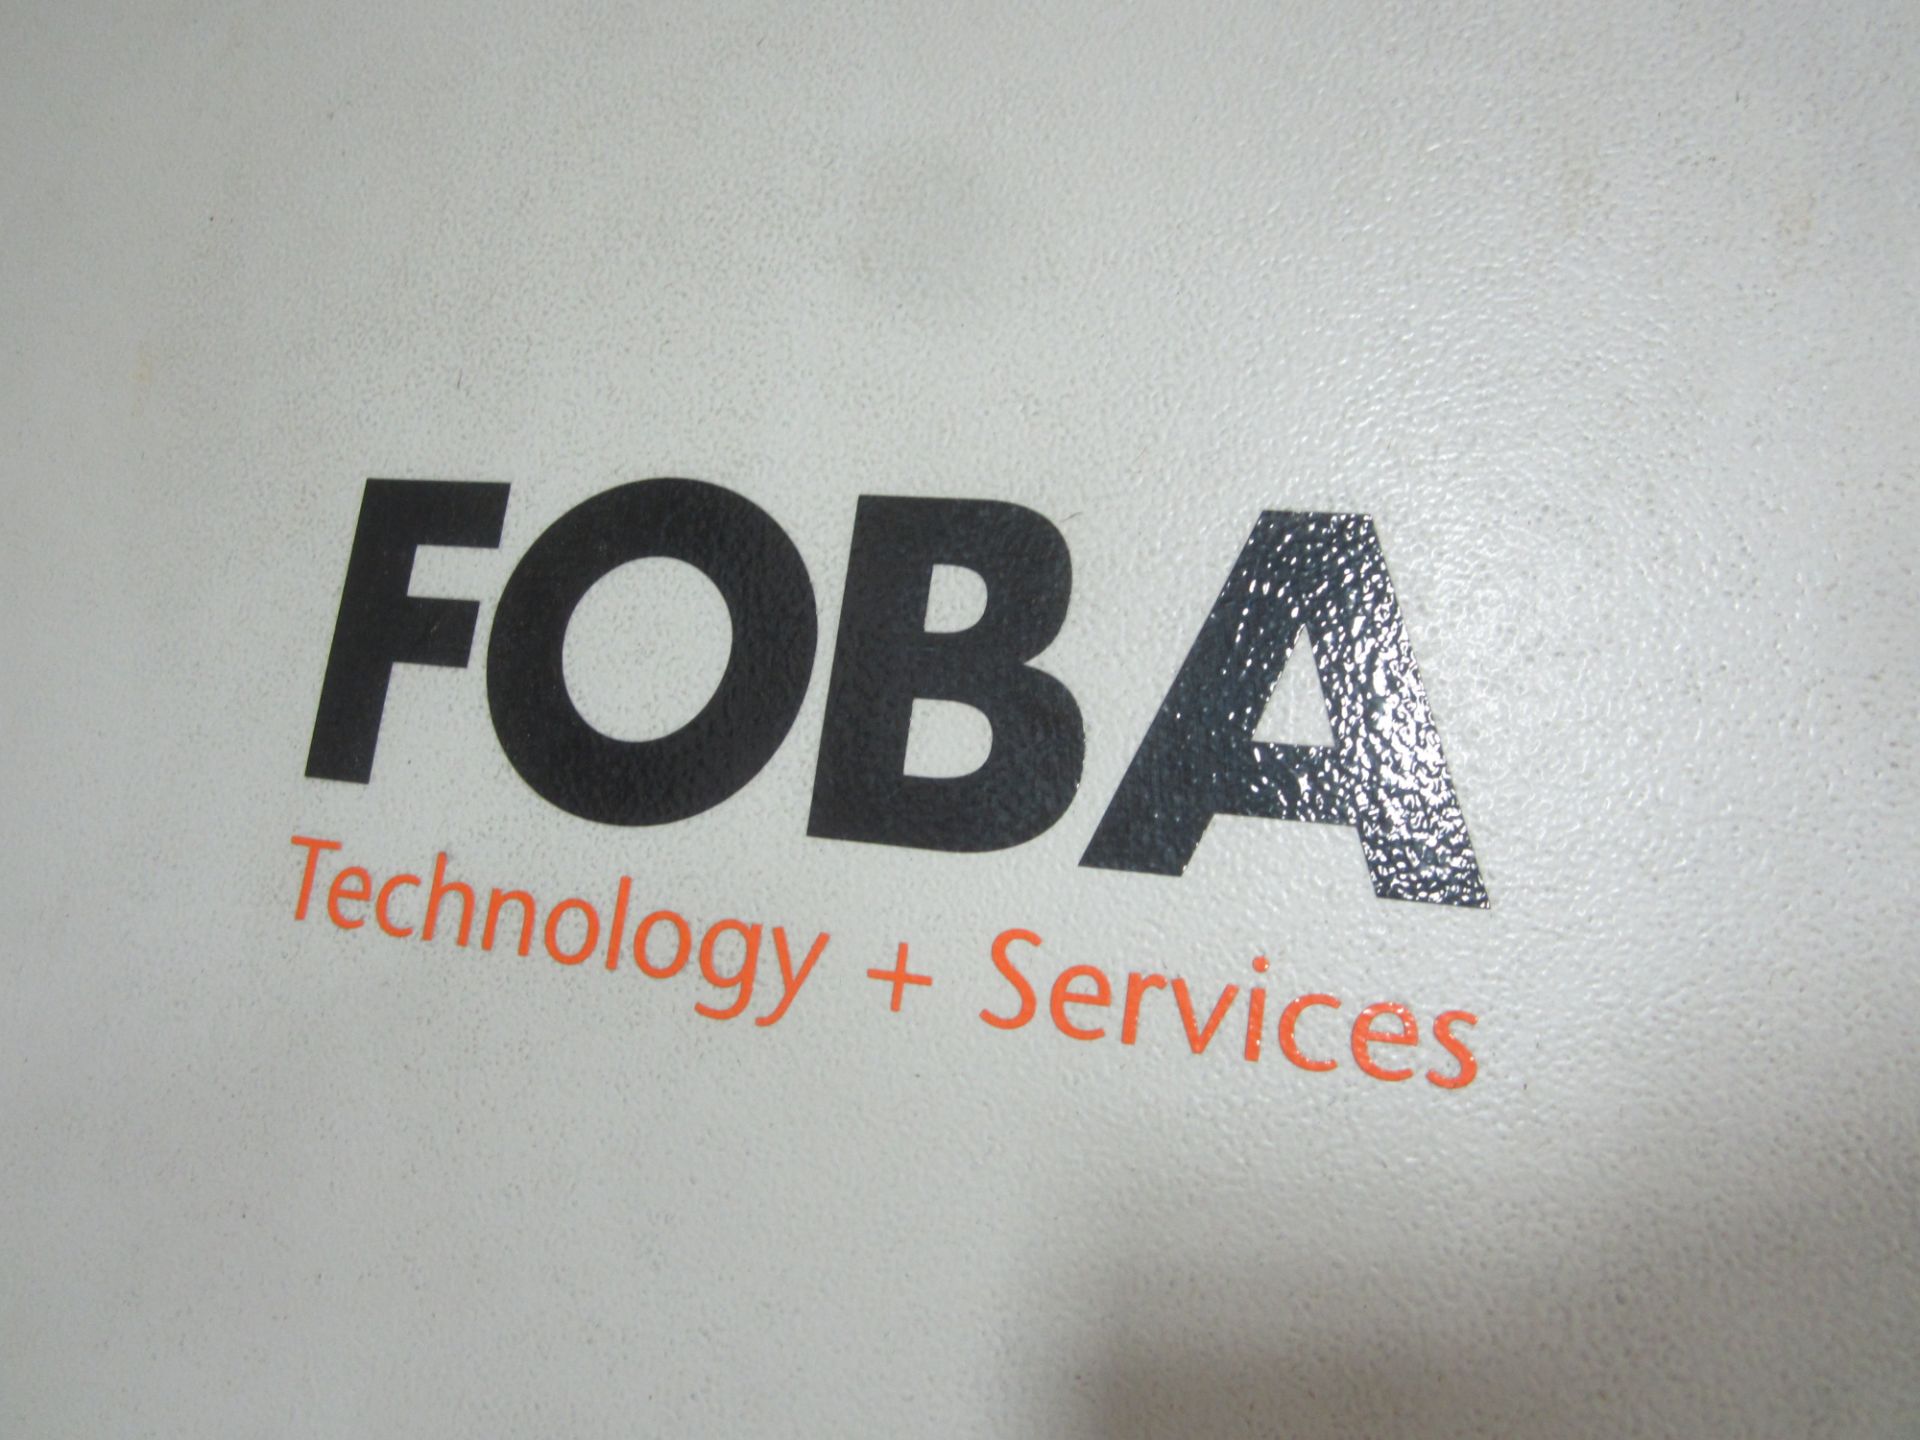 Foba Model G5 CNC Laser Parts Marker, s/n 106520/10000, New 2007, 4th Axis Indexer, 4.72" X 4.72" - Image 12 of 13